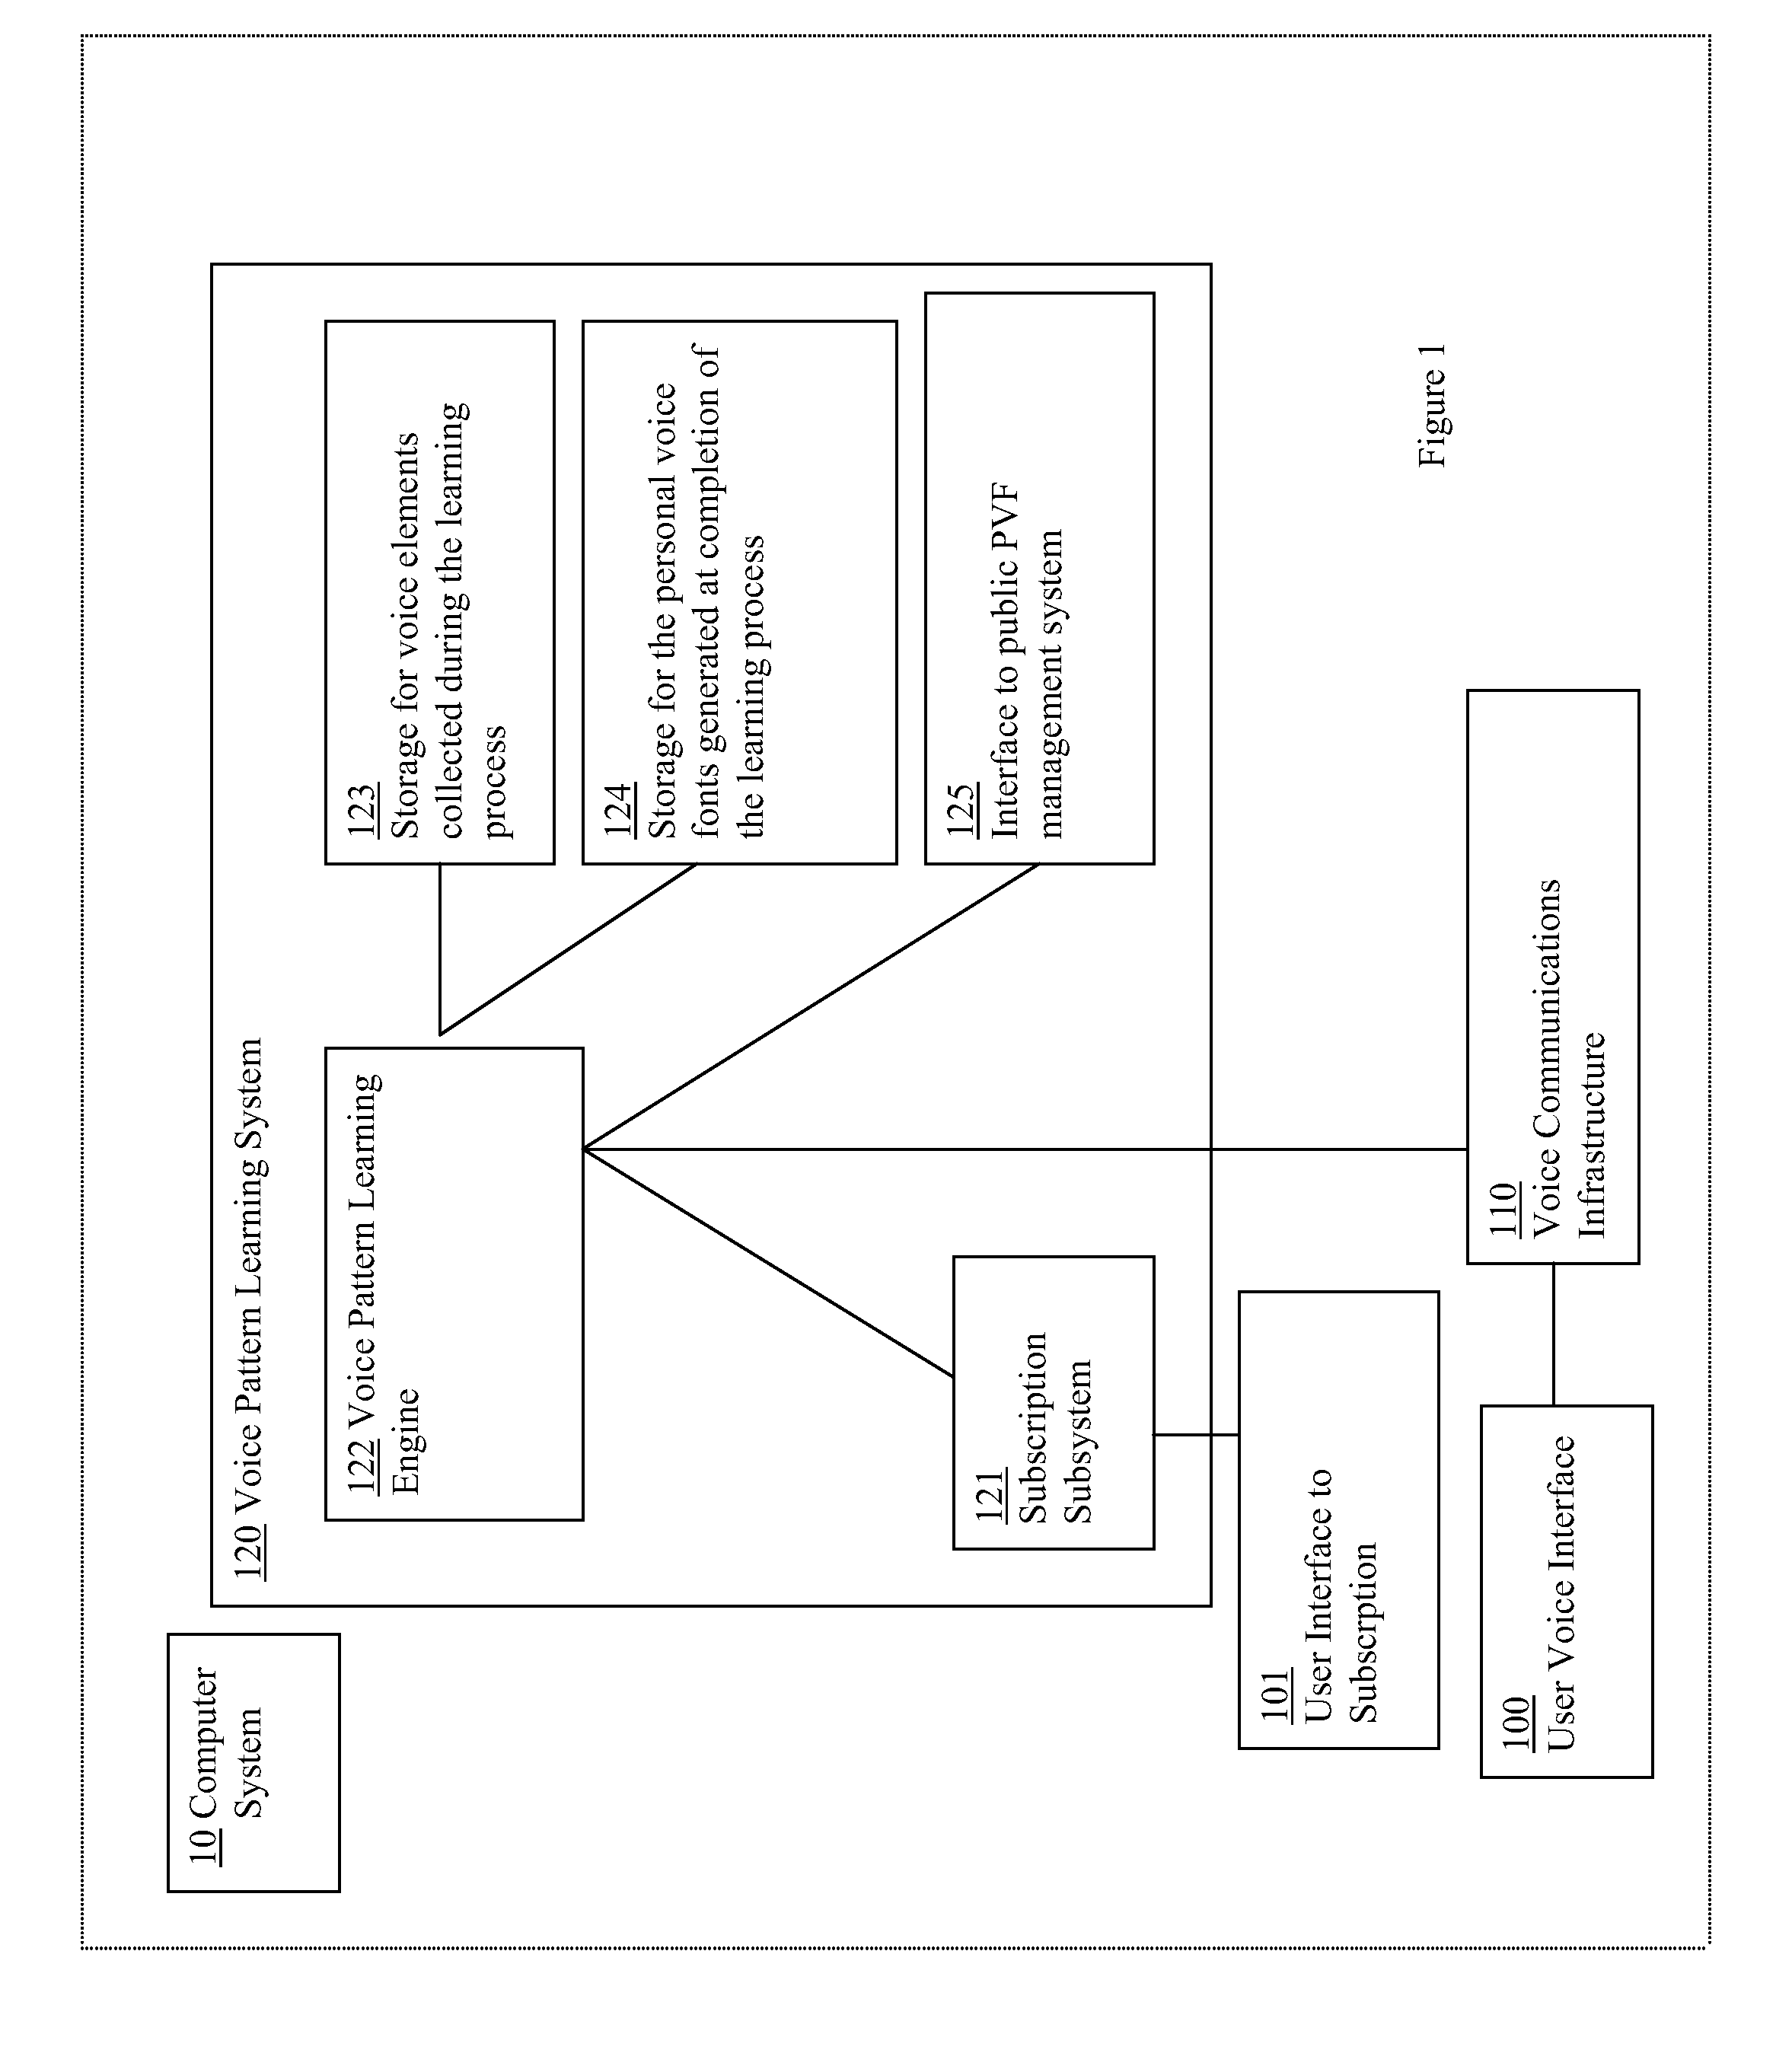 Method for dynamic learning of individual voice patterns